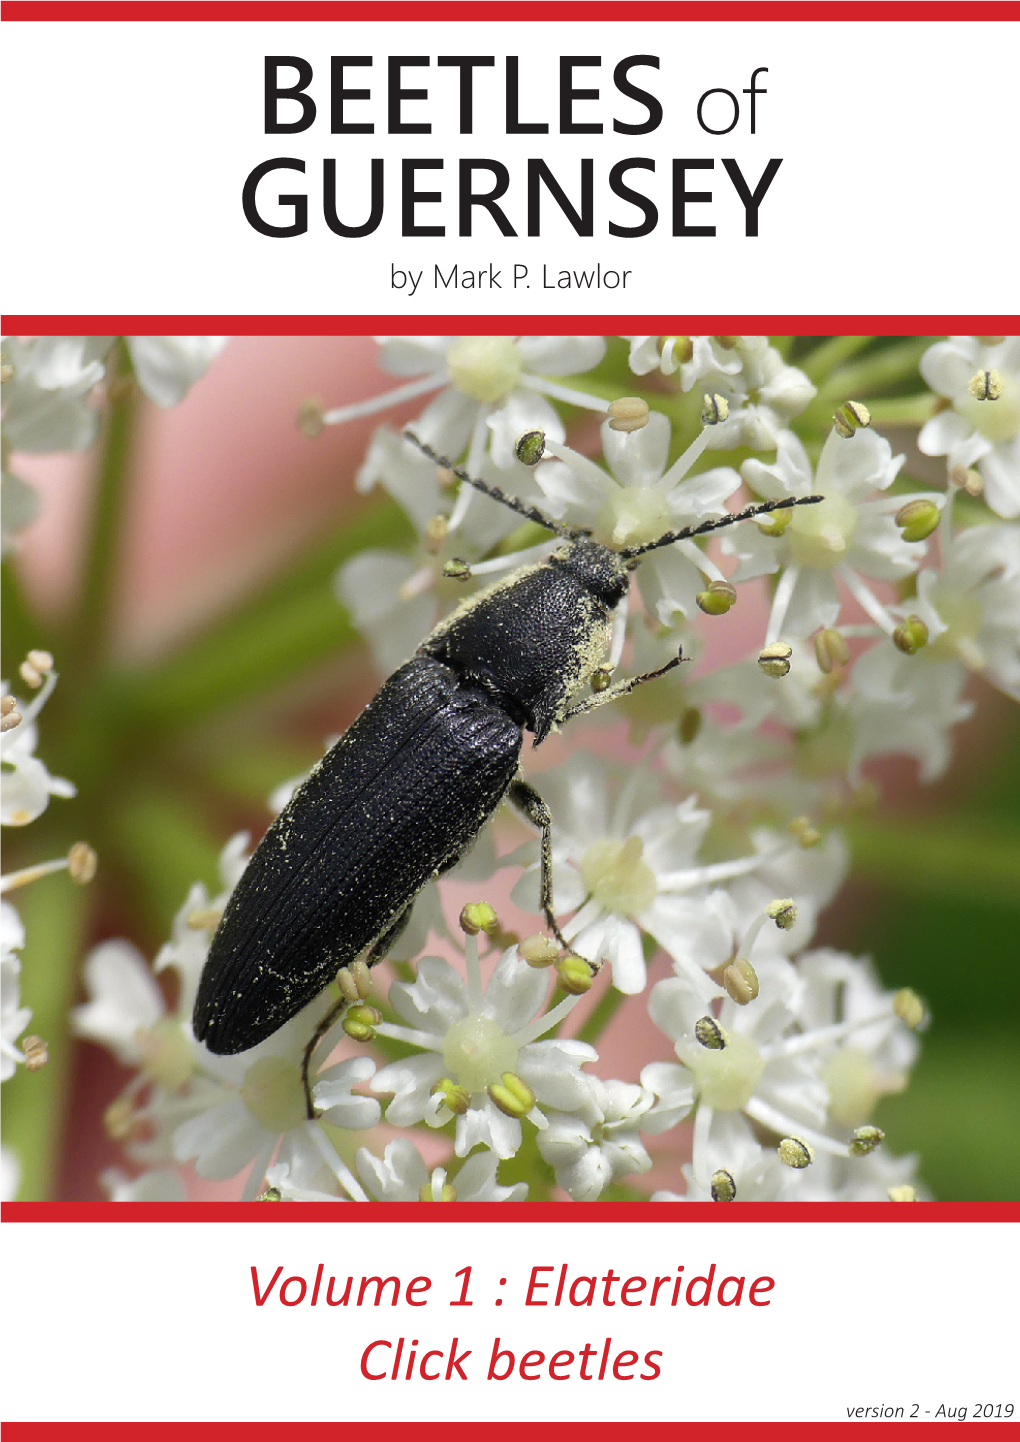 BEETLES of GUERNSEY by Mark P